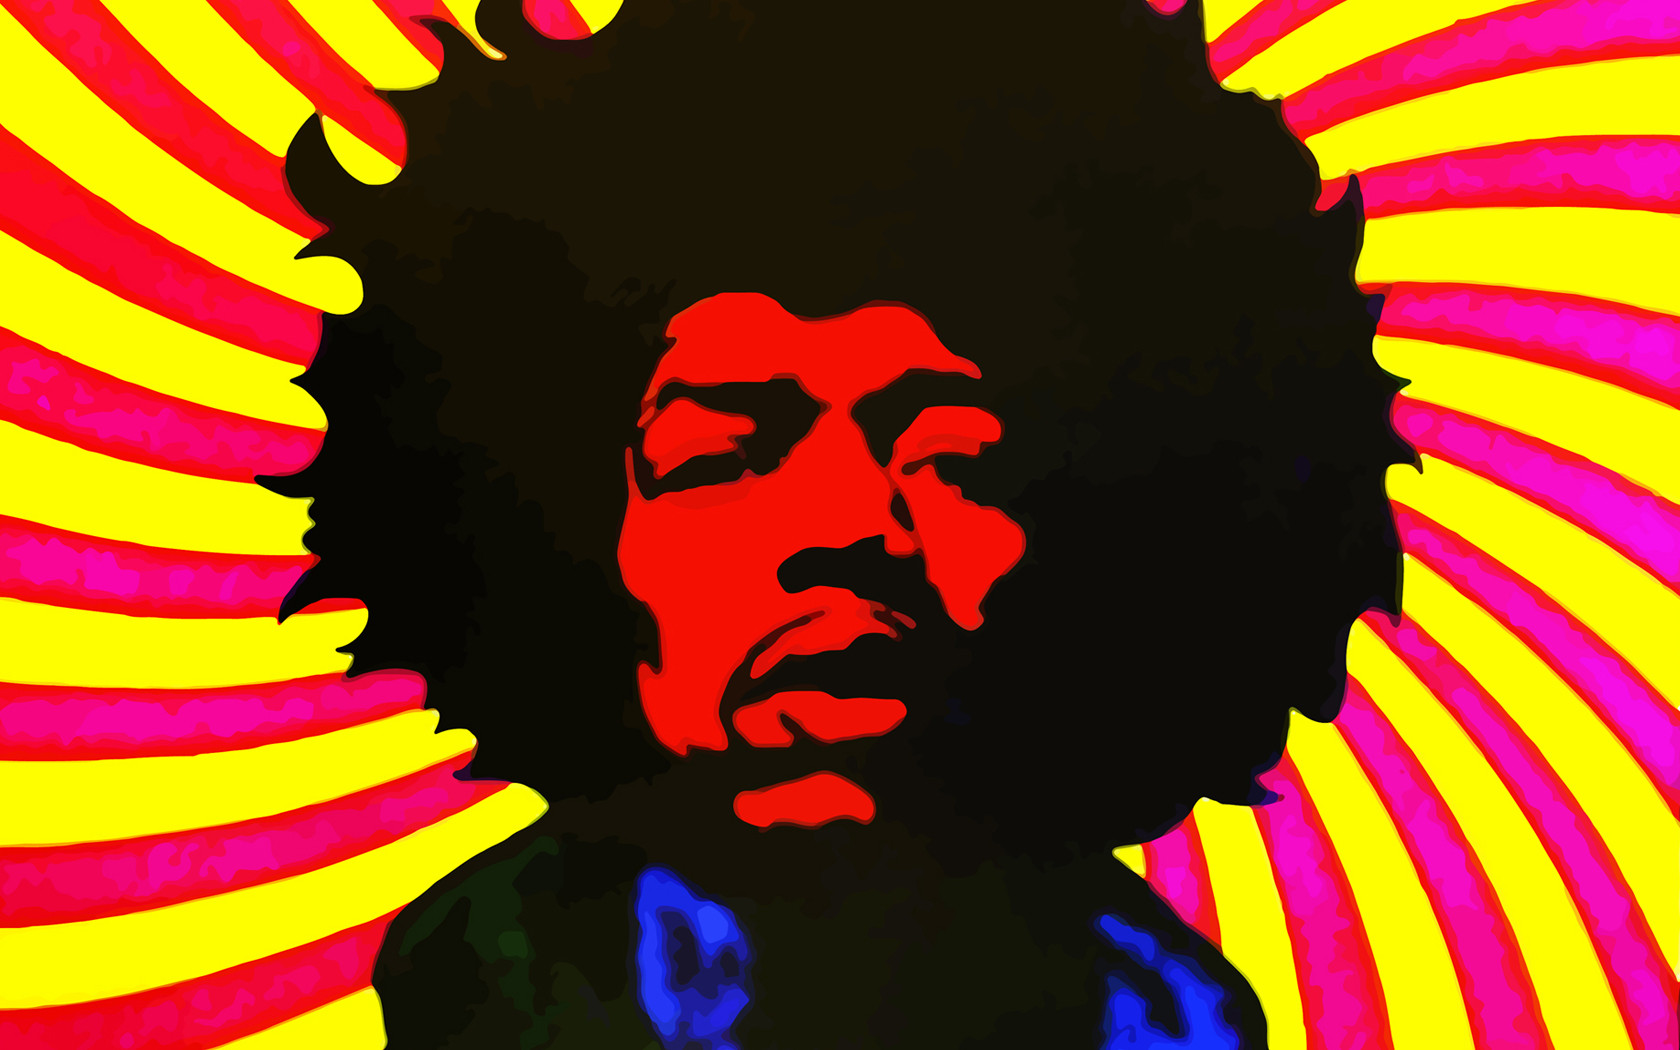 A trademark of Experience Hendrix LLC, but not necessarily the property of any member of